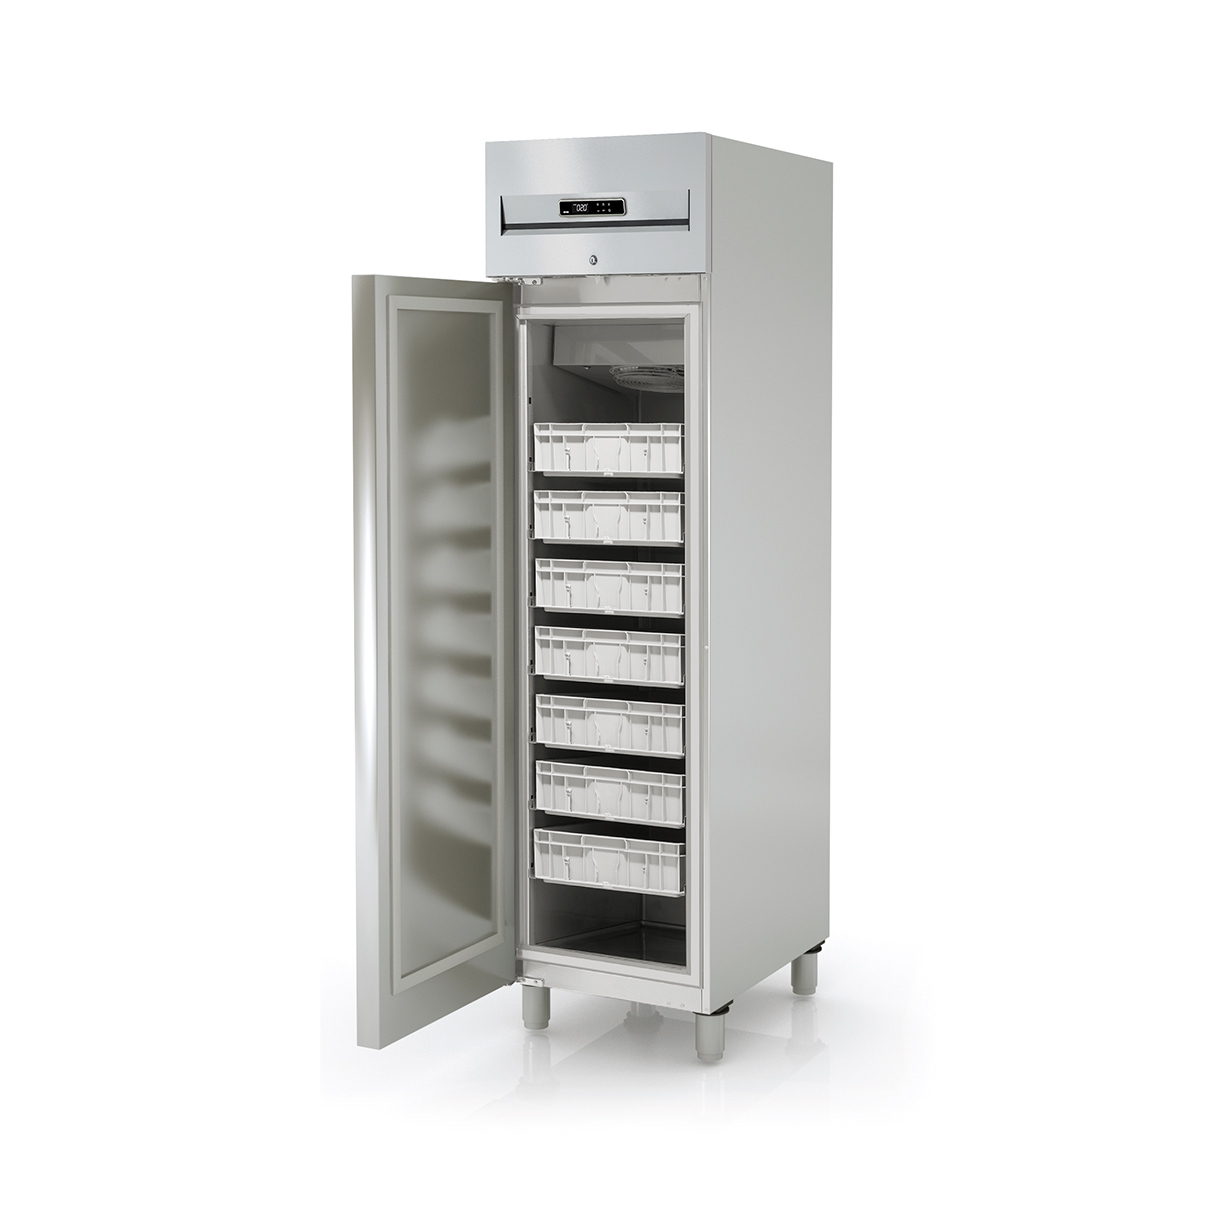 Euro Snack Fish Refrigerated Cabinet AEP-55-7